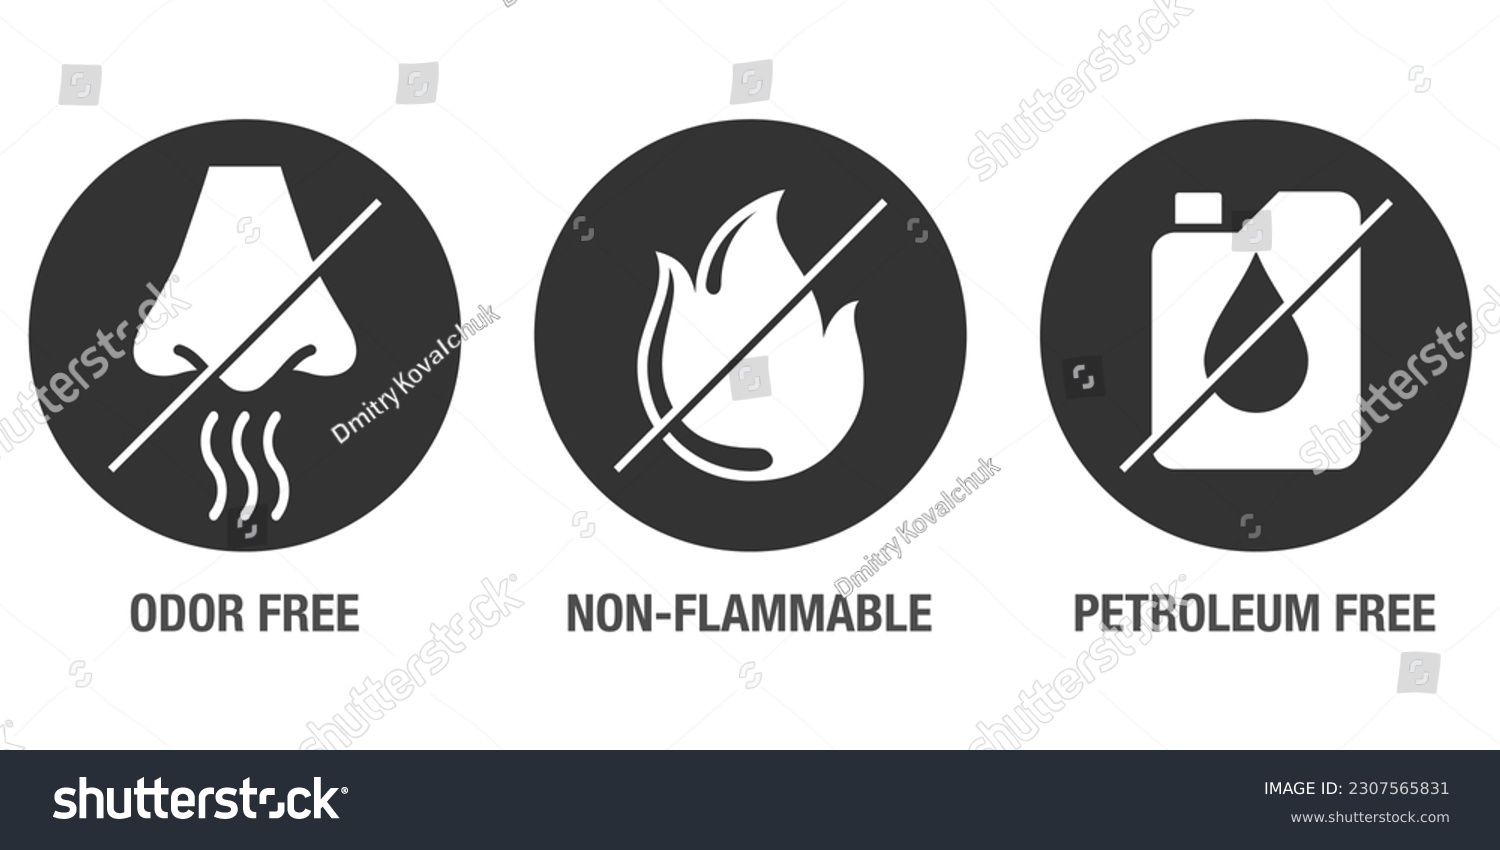 SVG of Odor free, Petroleum free, Non-flammable - flat icons set for labeling of cleaning agent or other household chemicals svg